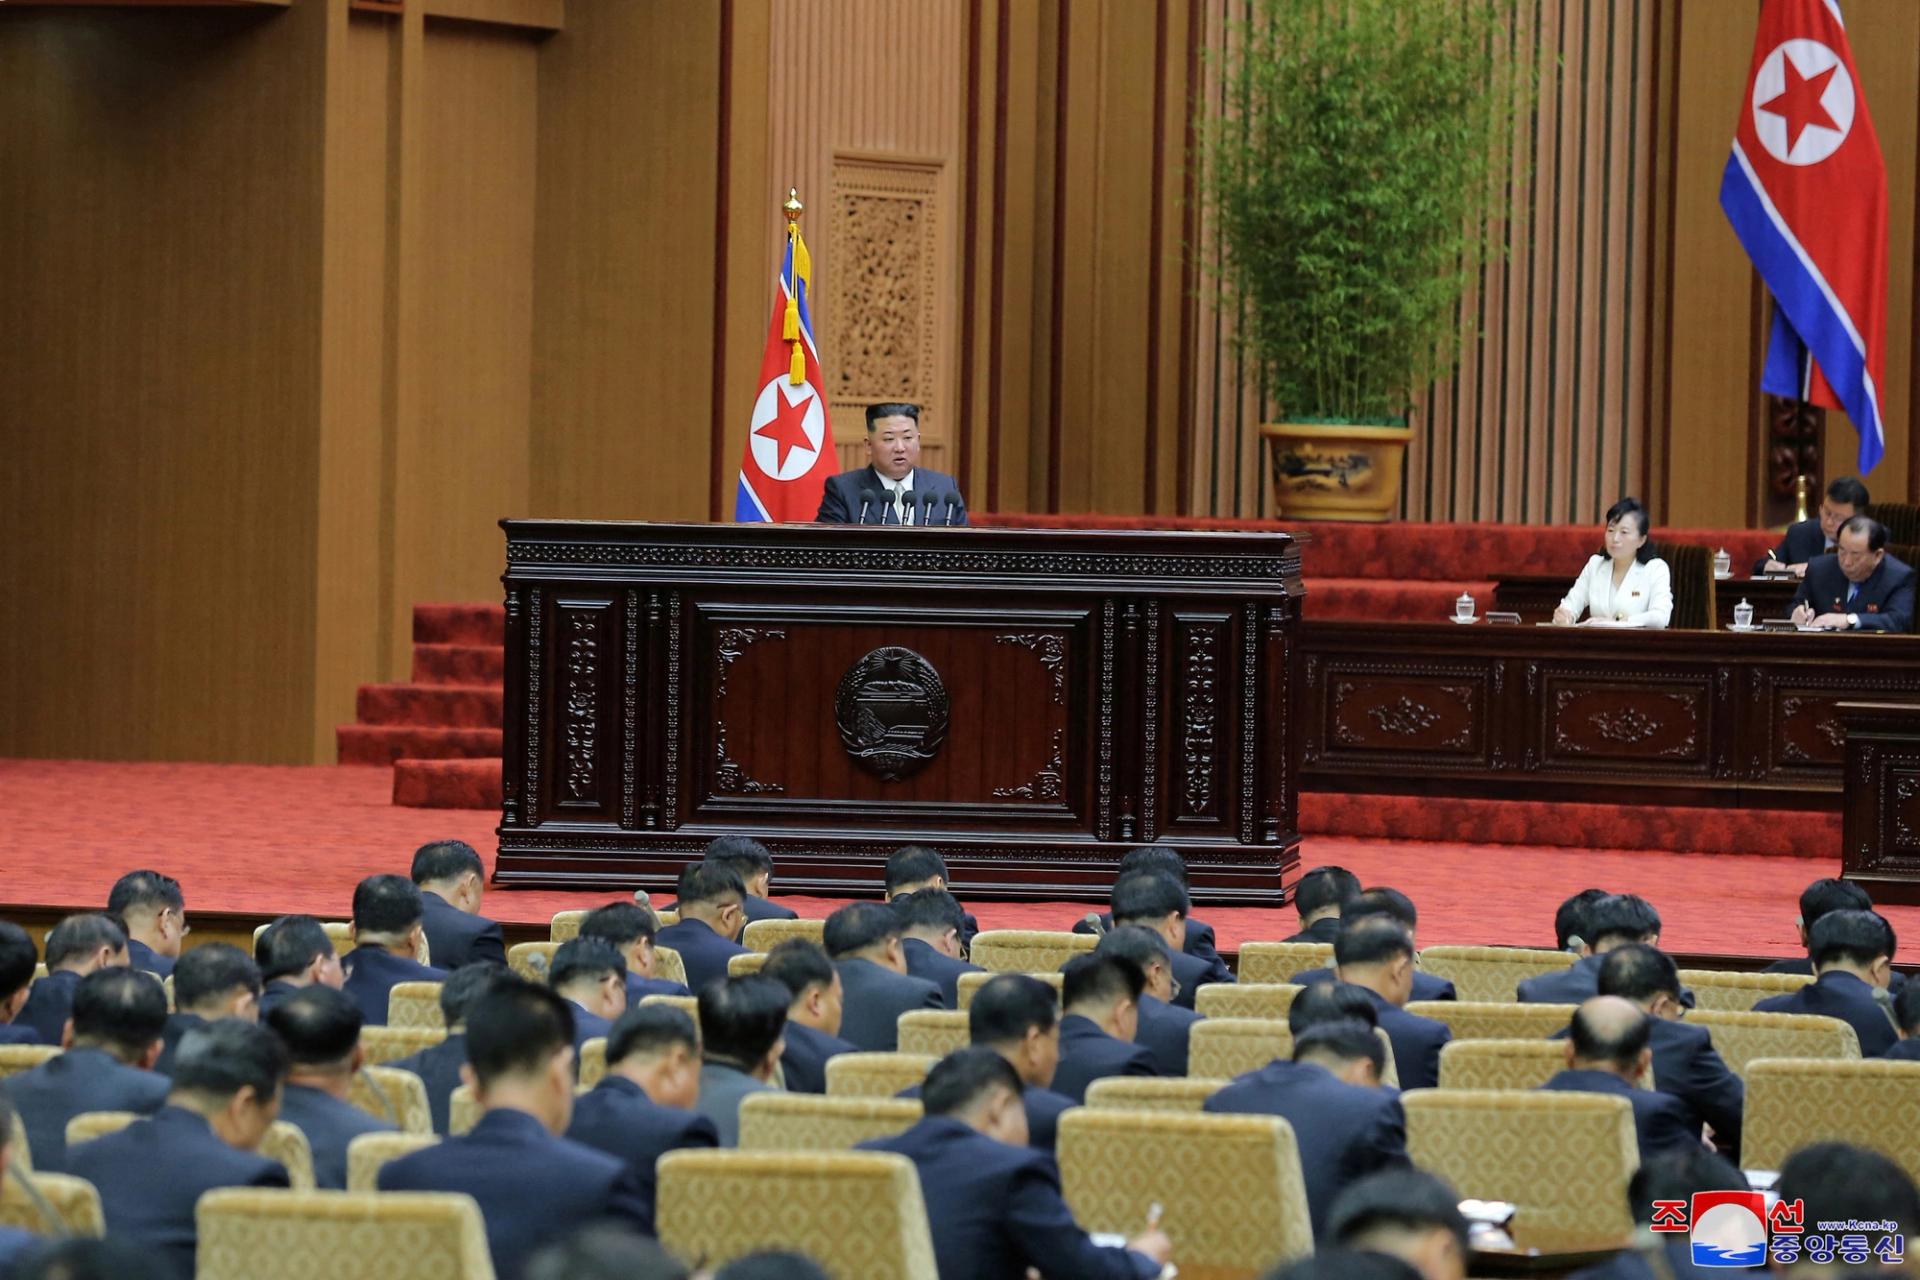 North Korea's leader Kim Jong Un addresses the Supreme People's Assembly, North Korea's parliament, which passed a law officially enshrining its nuclear weapons policies, in Pyongyang, North Korea, September 8, 2022 in this photo released by North Korea's Korean Central News Agency (KCNA).